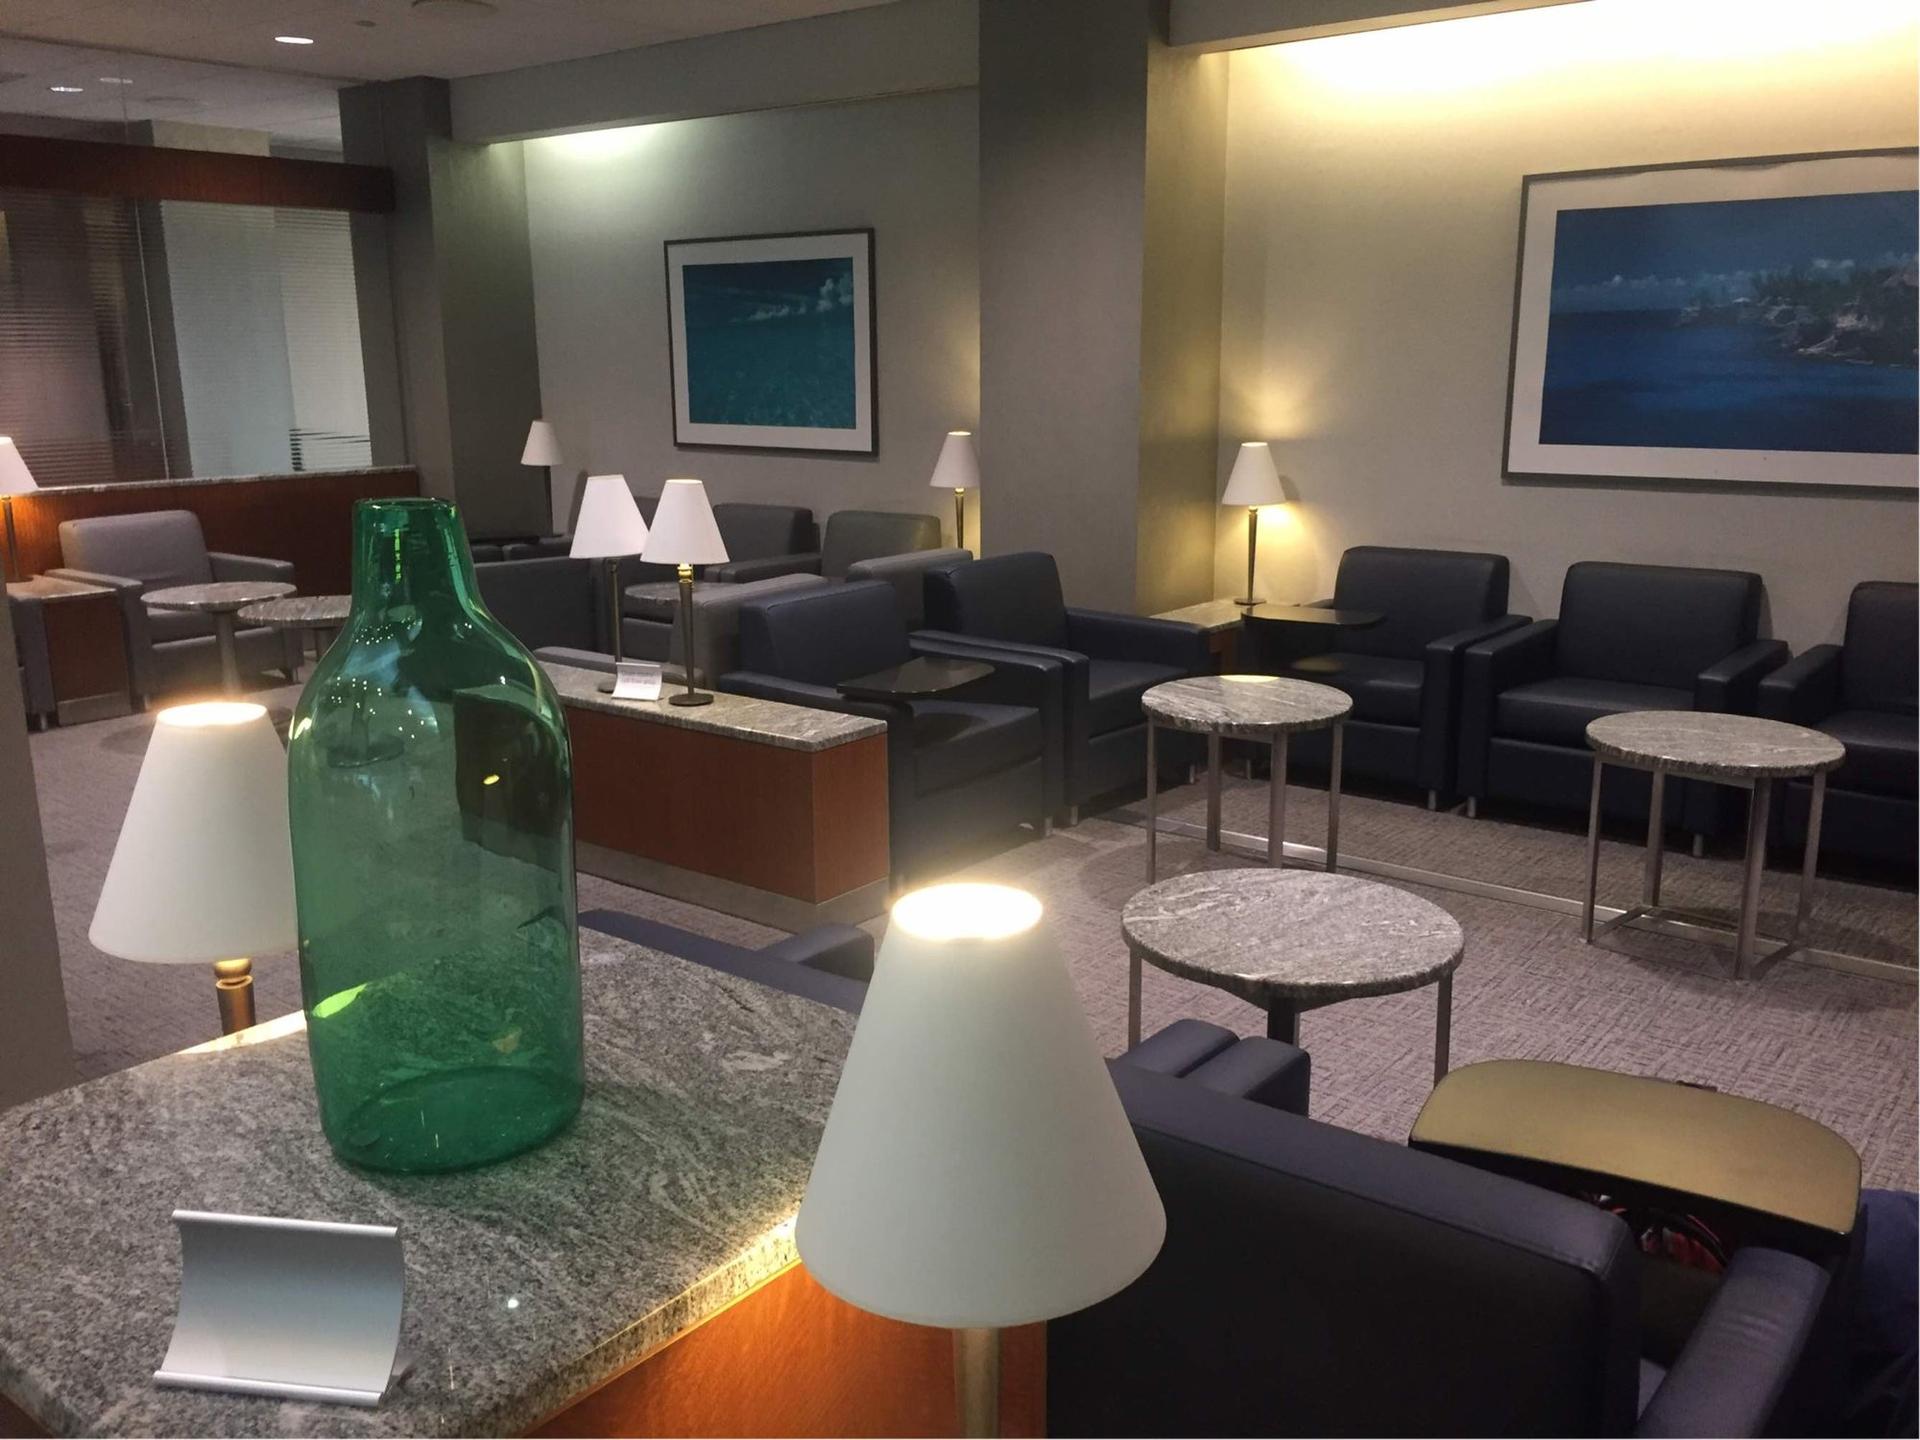 American Airlines Admirals Club image 11 of 48